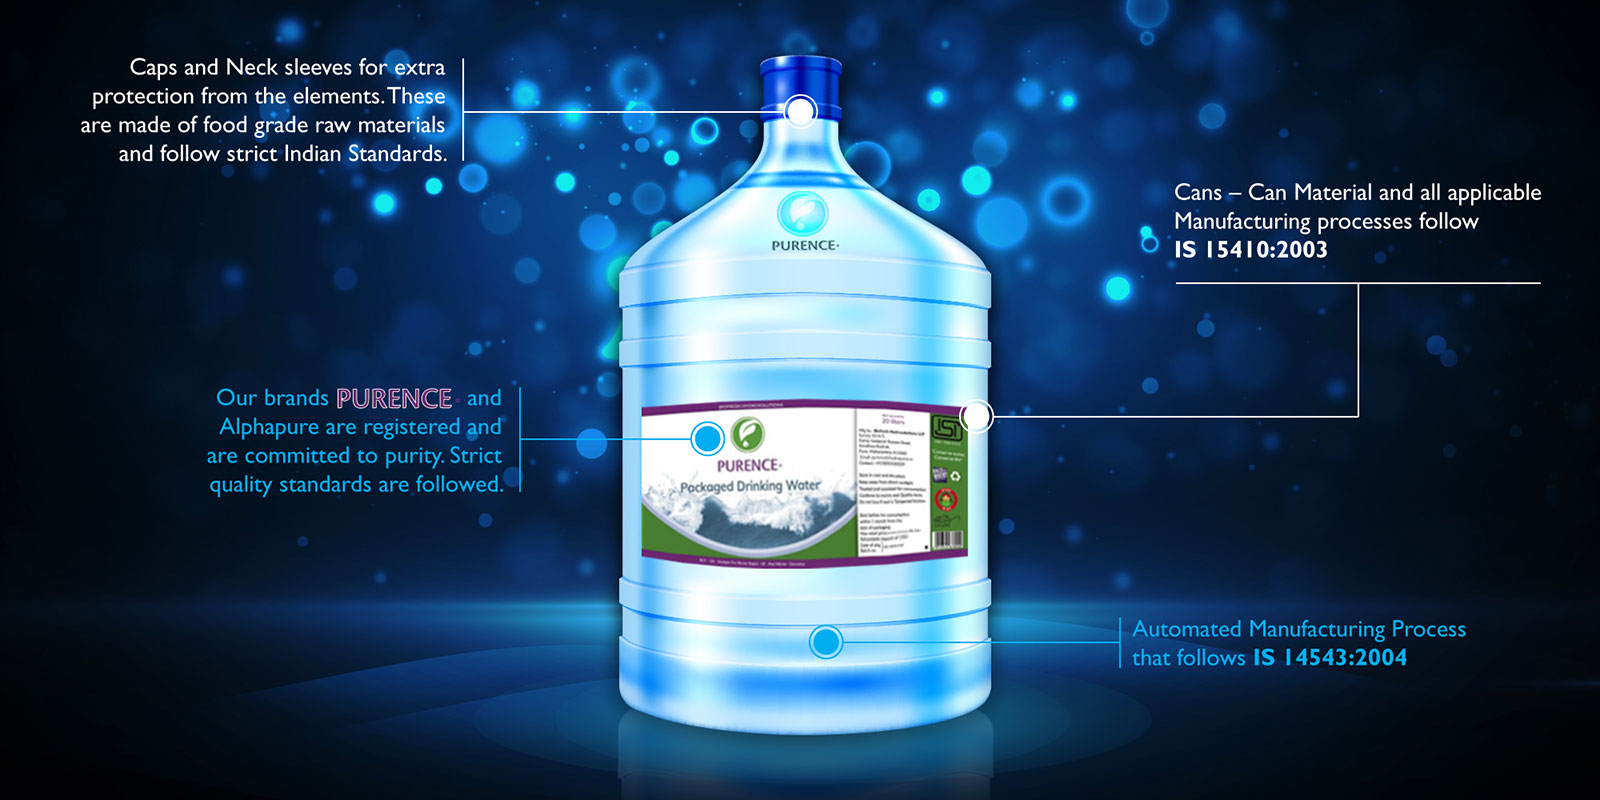 BEST PACKED DRINKING WATER  | PURENCE | DRINKING WATER IN WANOWRIE, DRINKING WATER SUPLLIERS IN WANOWRIE, PACKED DRINKING WATER IN WANOWRIE, 20LTR WATER IN WANOWRIE, 20LTR WATER JAR IN WANOWRIE, SUPPLIERS, DEALERS, MANUFACTURERS, CAN, BEST. - GL25808